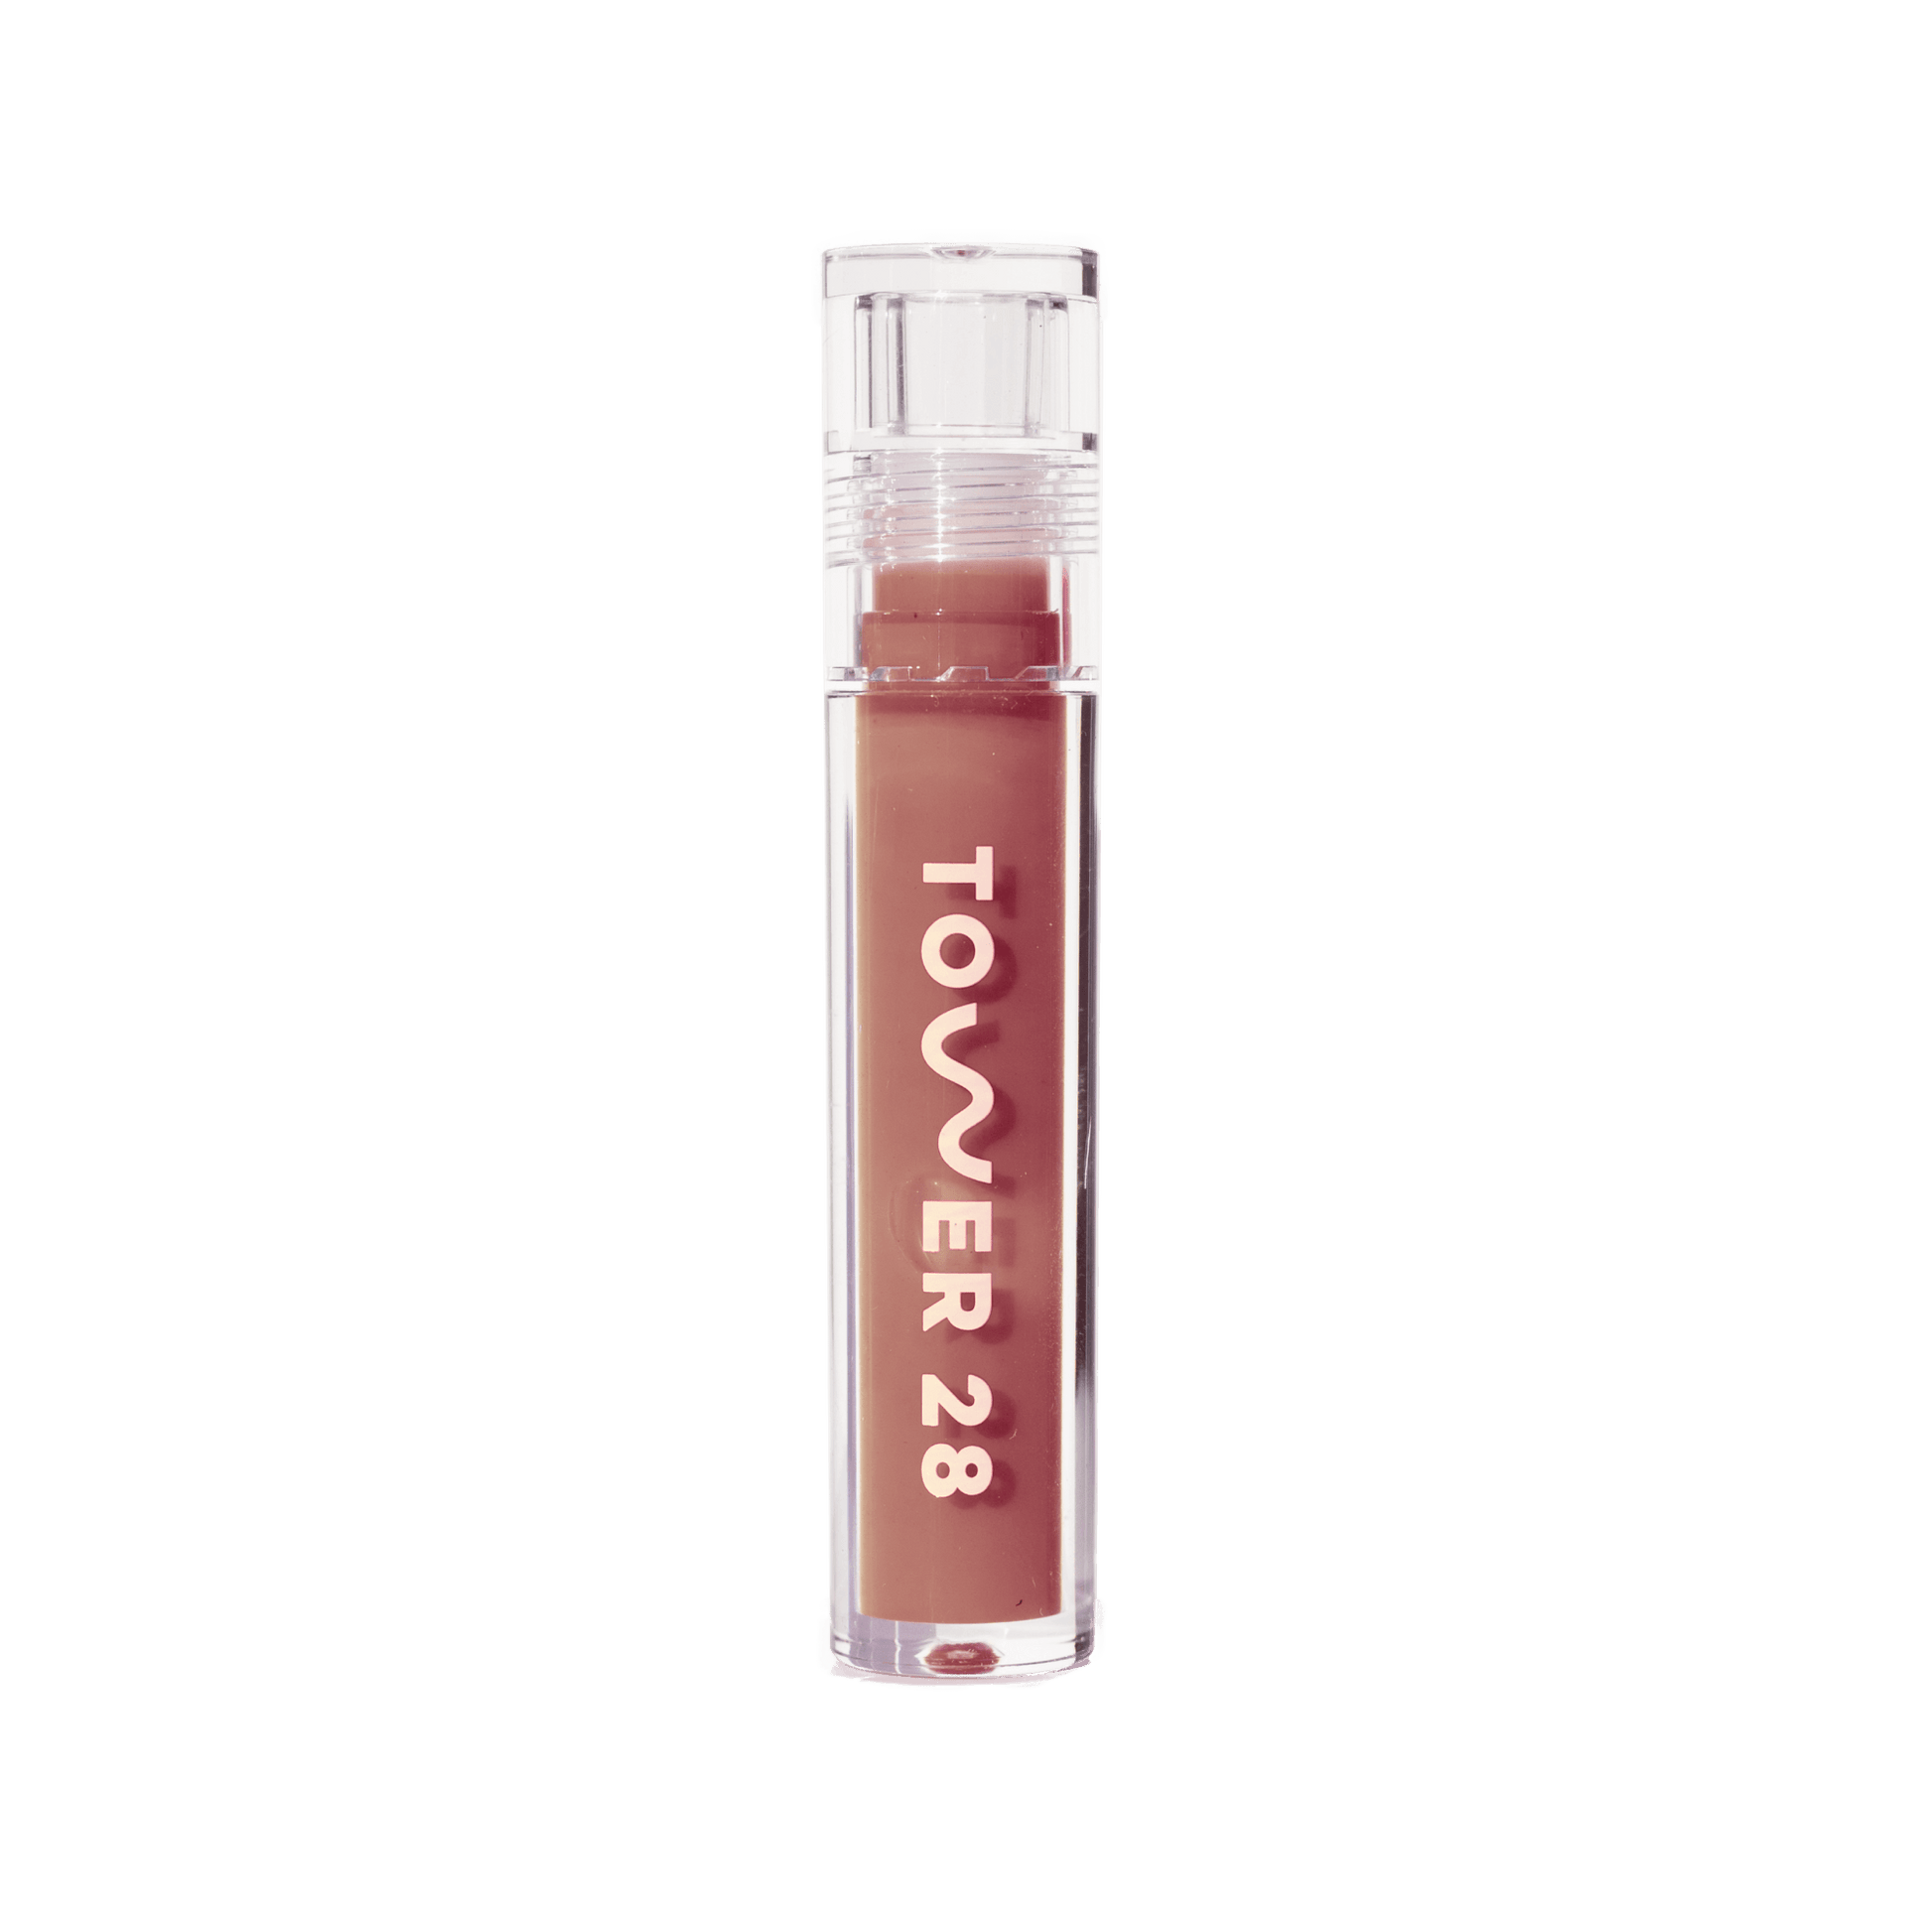 The Tower 28 Beauty ShineOn Lip Jelly in the shade Cashew